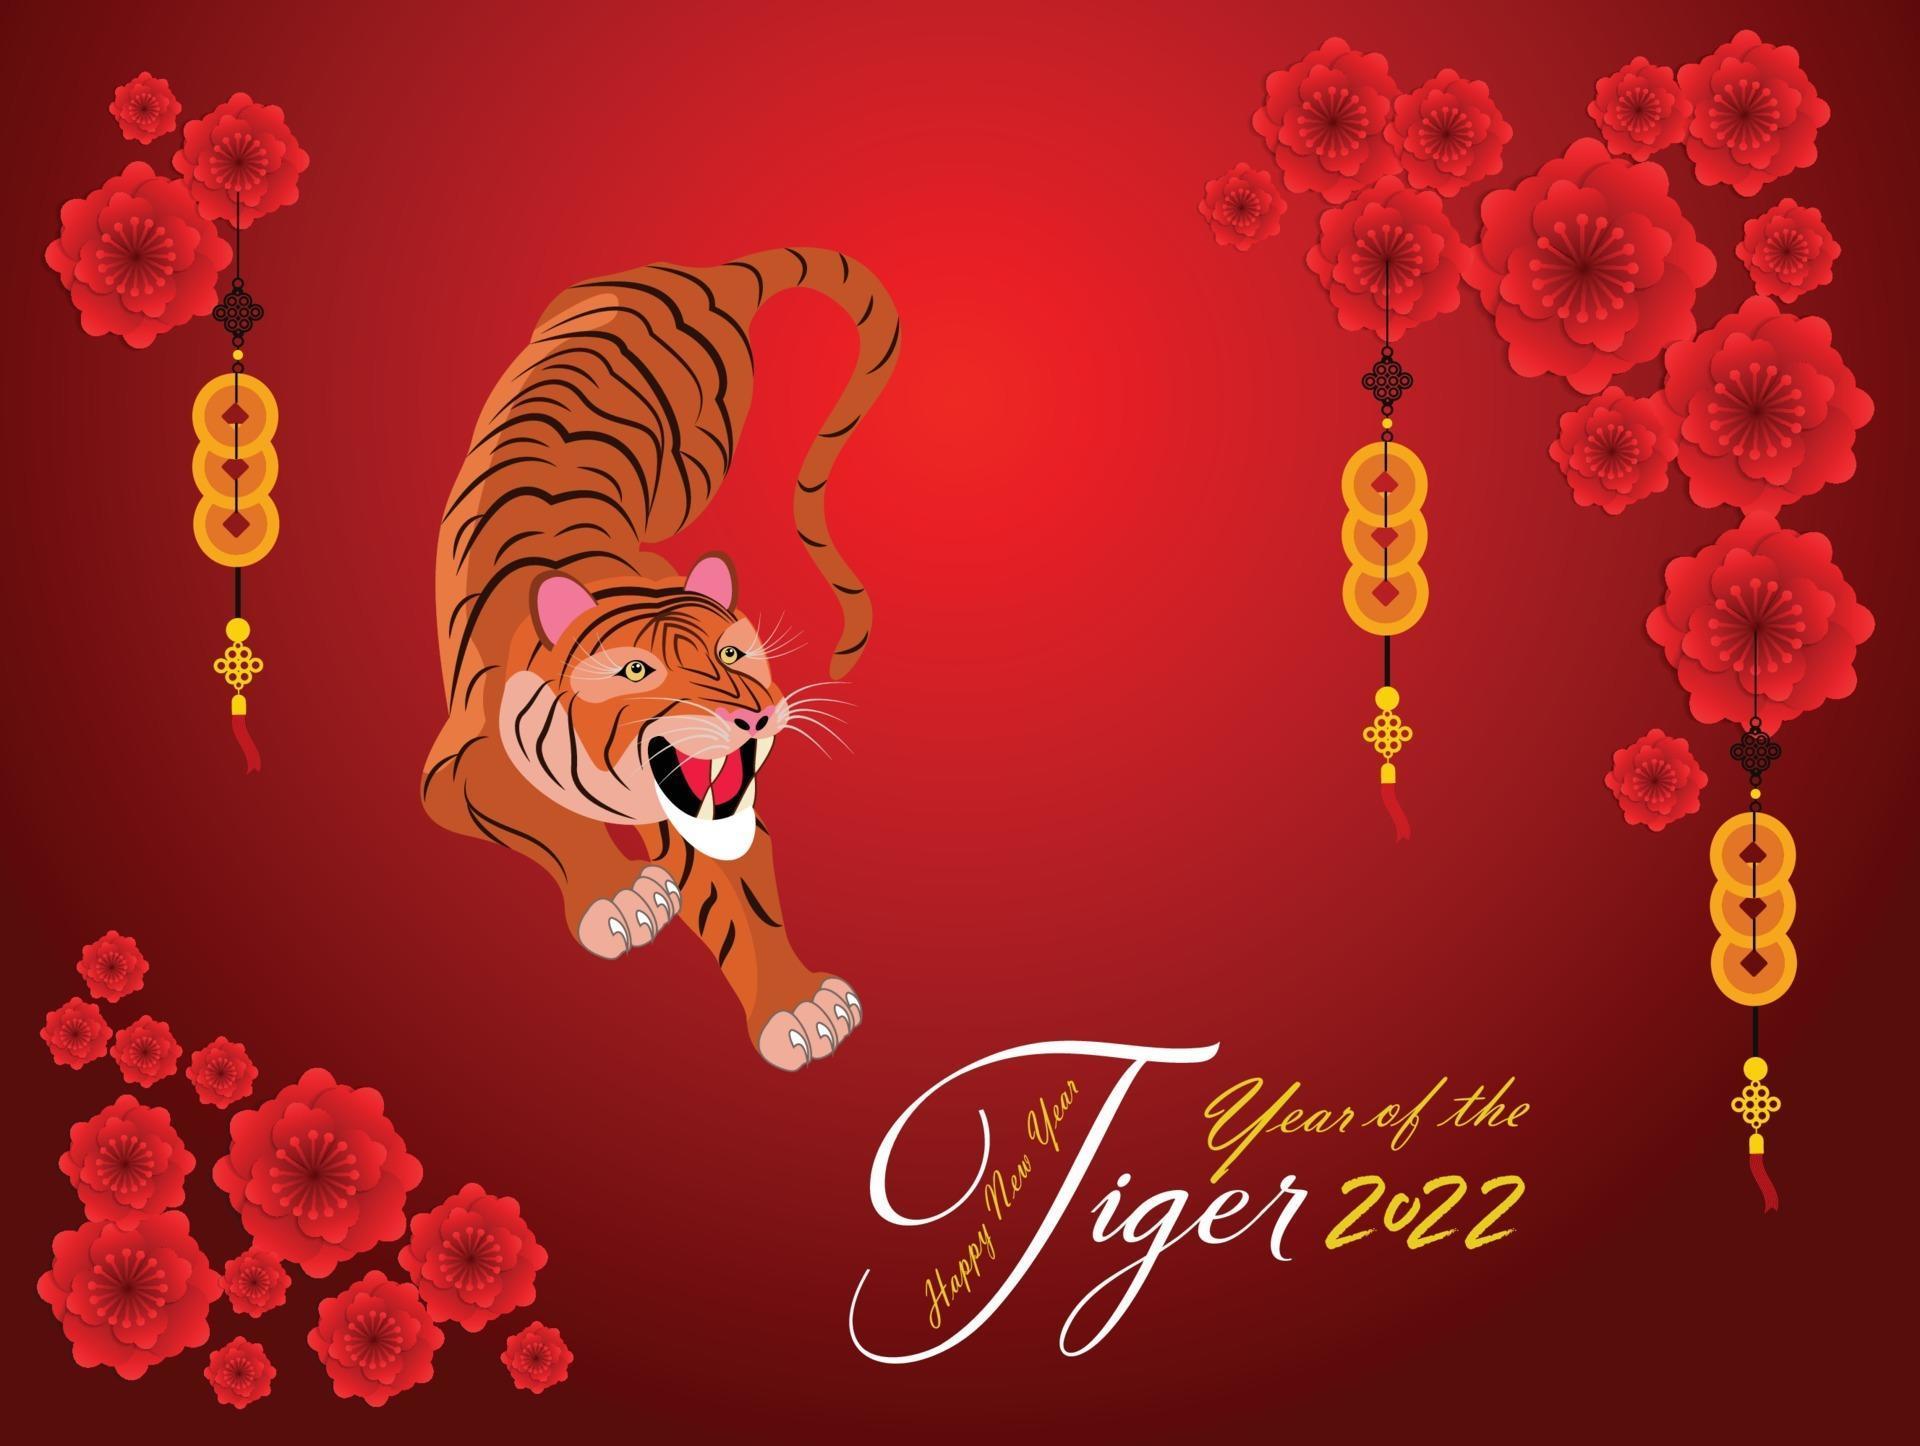 10 Gorgeous Year of the Tiger Nail Art Designs to Celebrate the Lunar New Year - wide 9